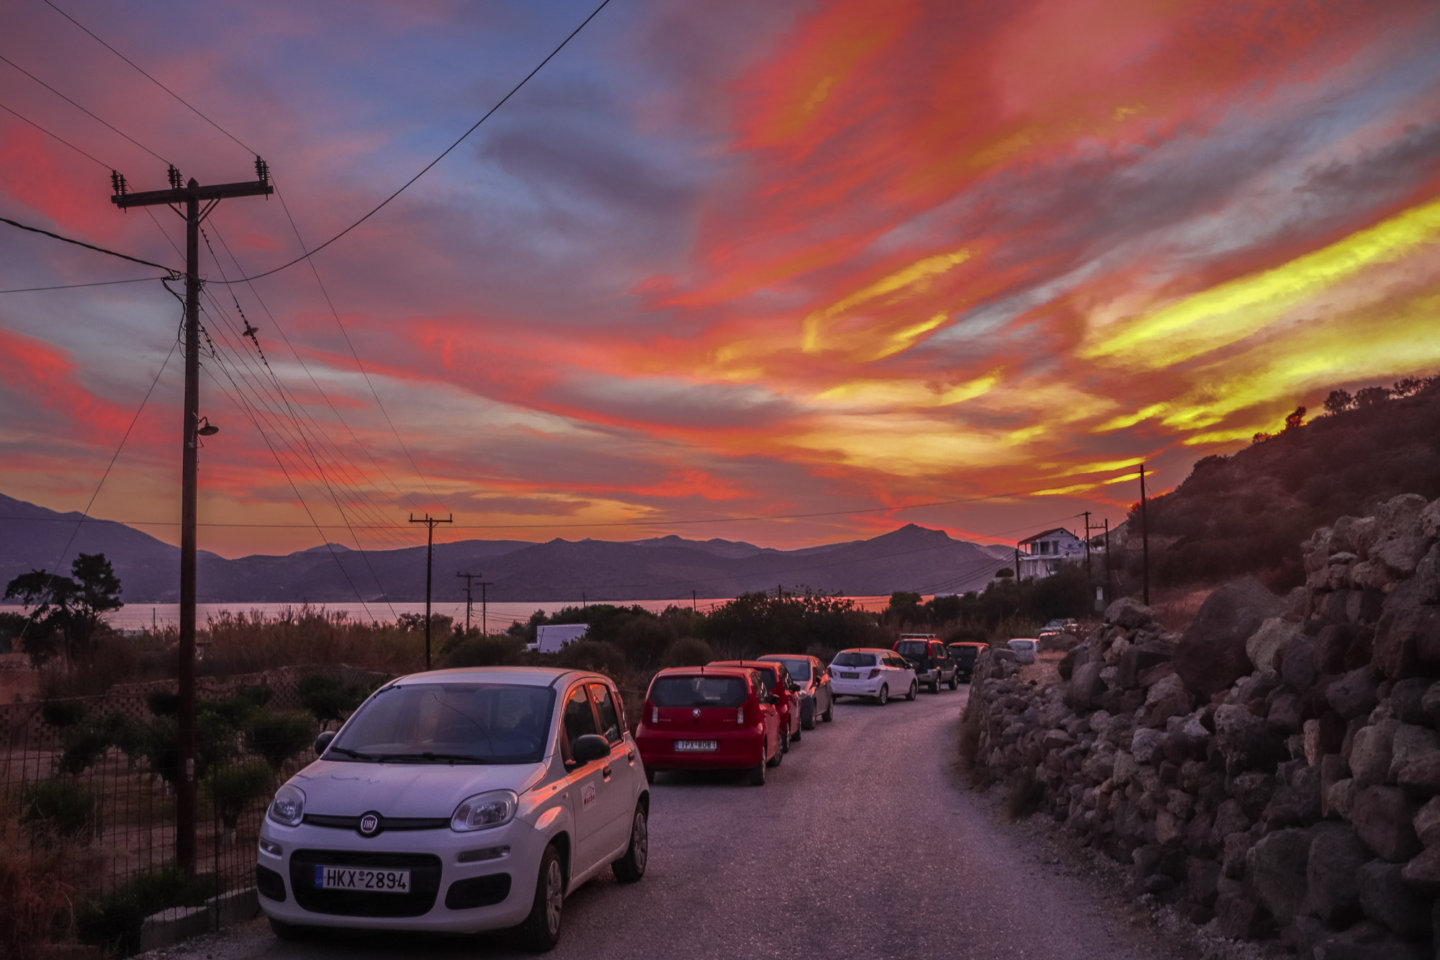 cars on a street near a Greek village during sunset